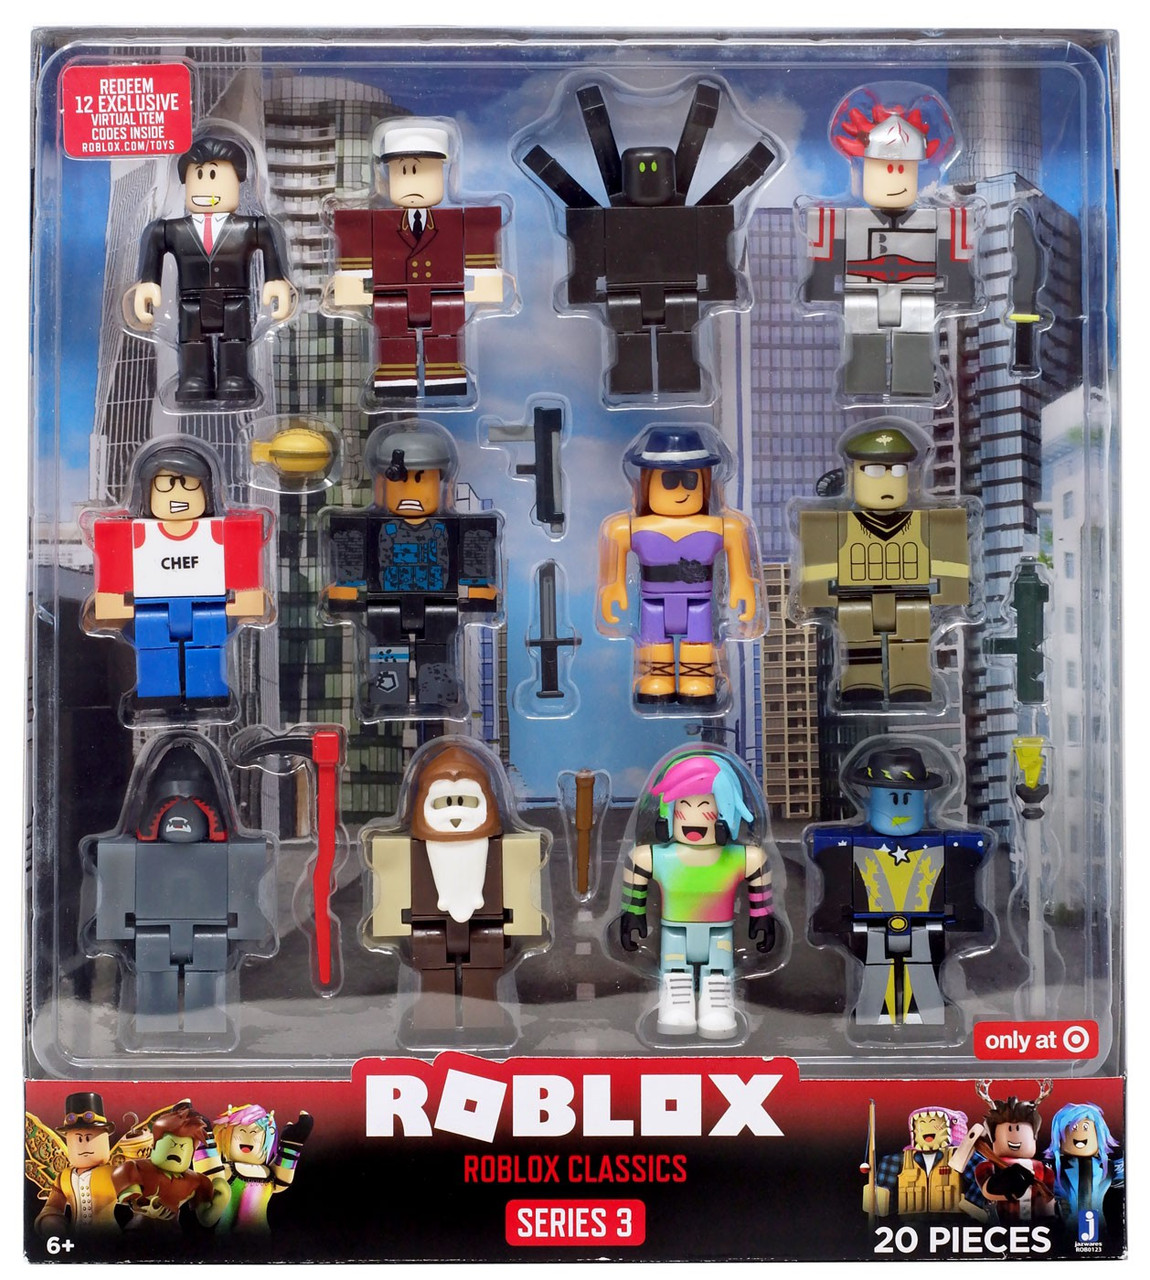 Series 3 Roblox Classics Exclusive Action Figure 12 Pack - roblox toys list